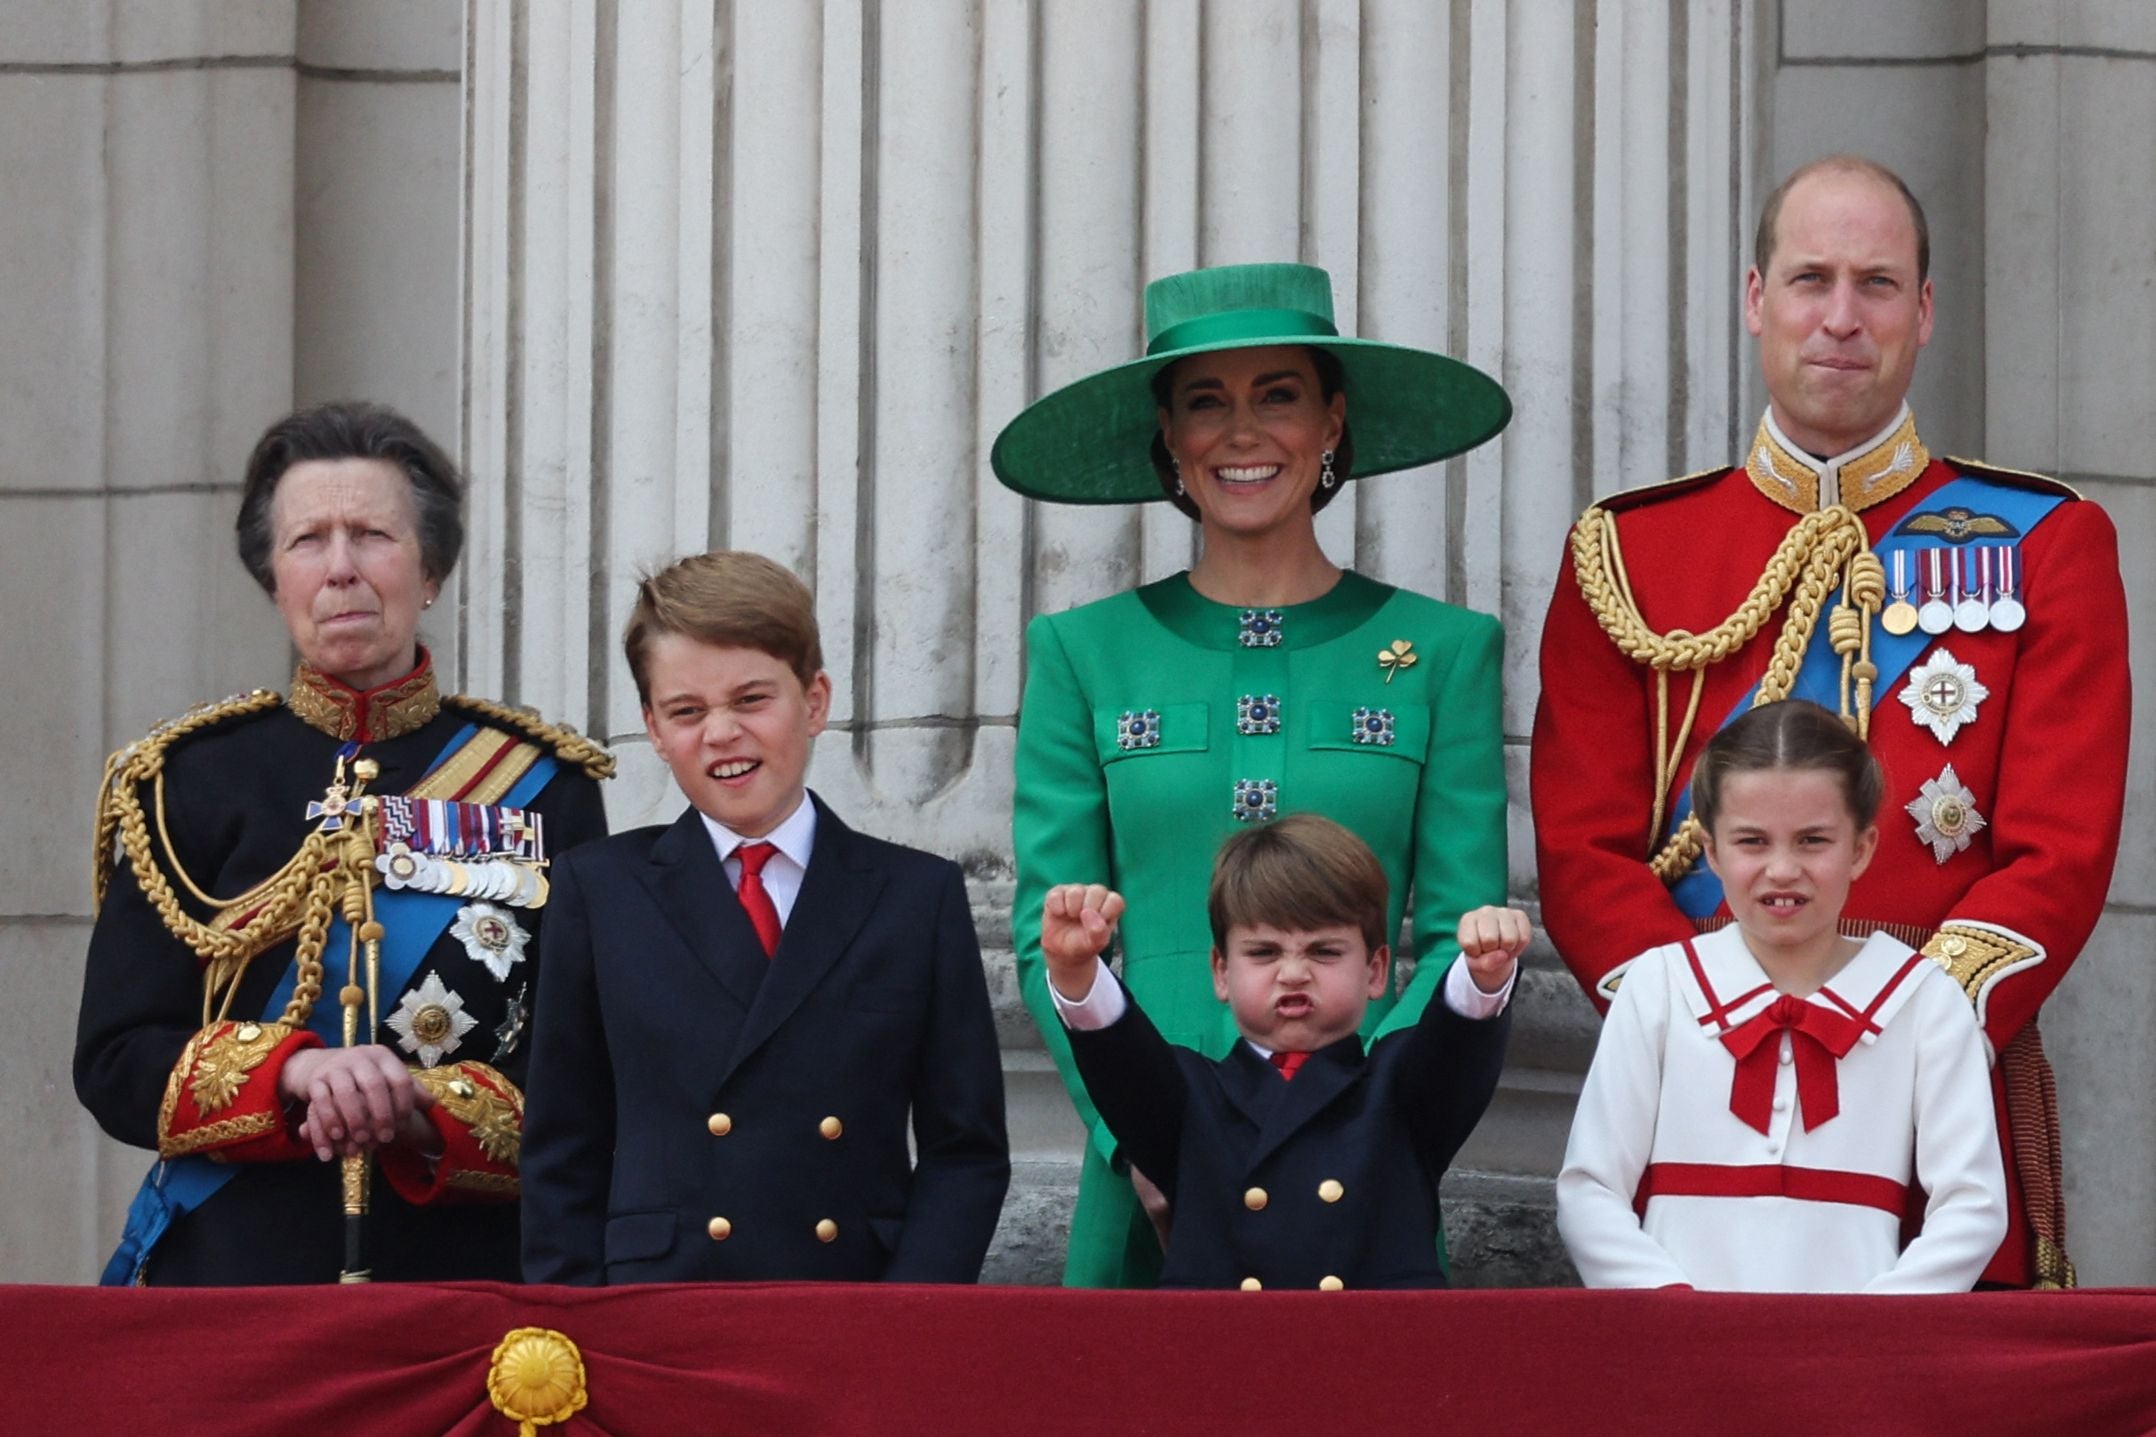 Members of the Royal Family on the Buckingham Palace balcony during Trooping the Colour